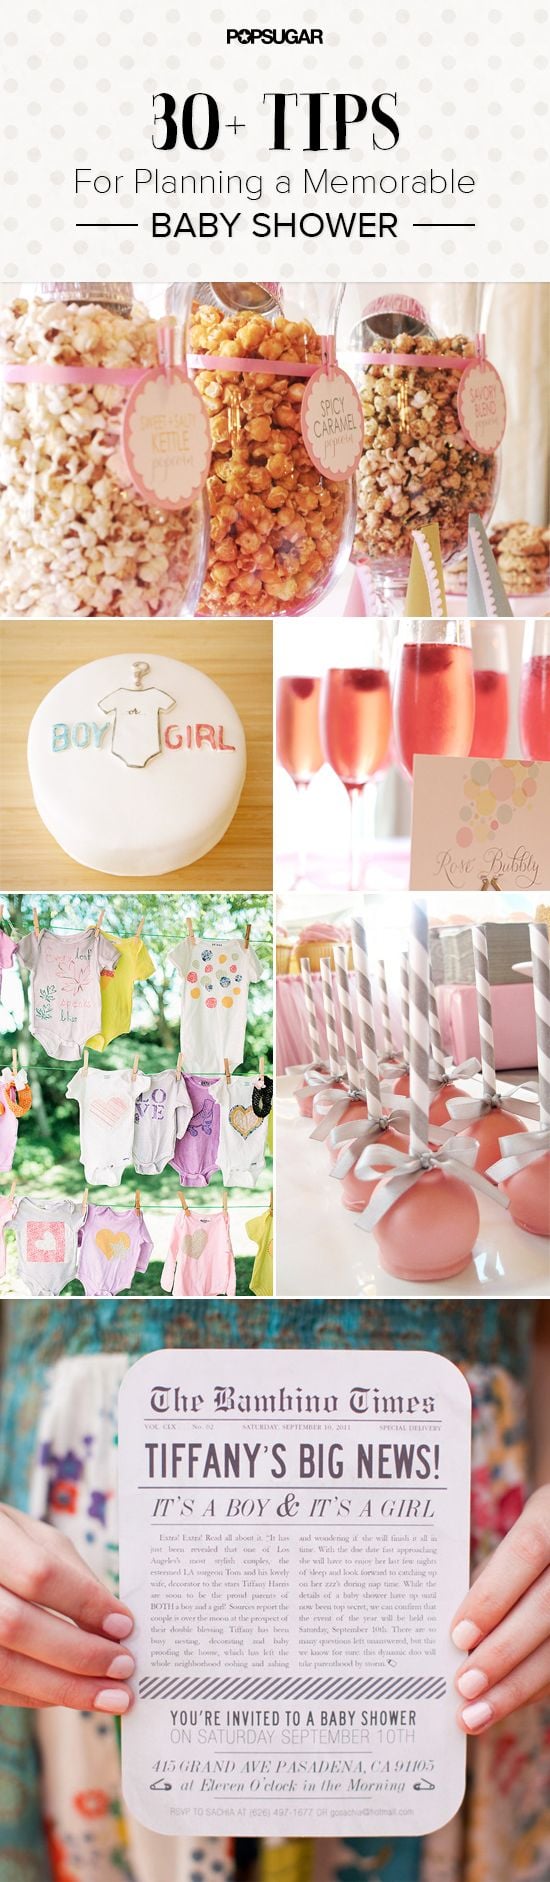 30+ Tips and Tricks to Make Your Baby Shower Shine